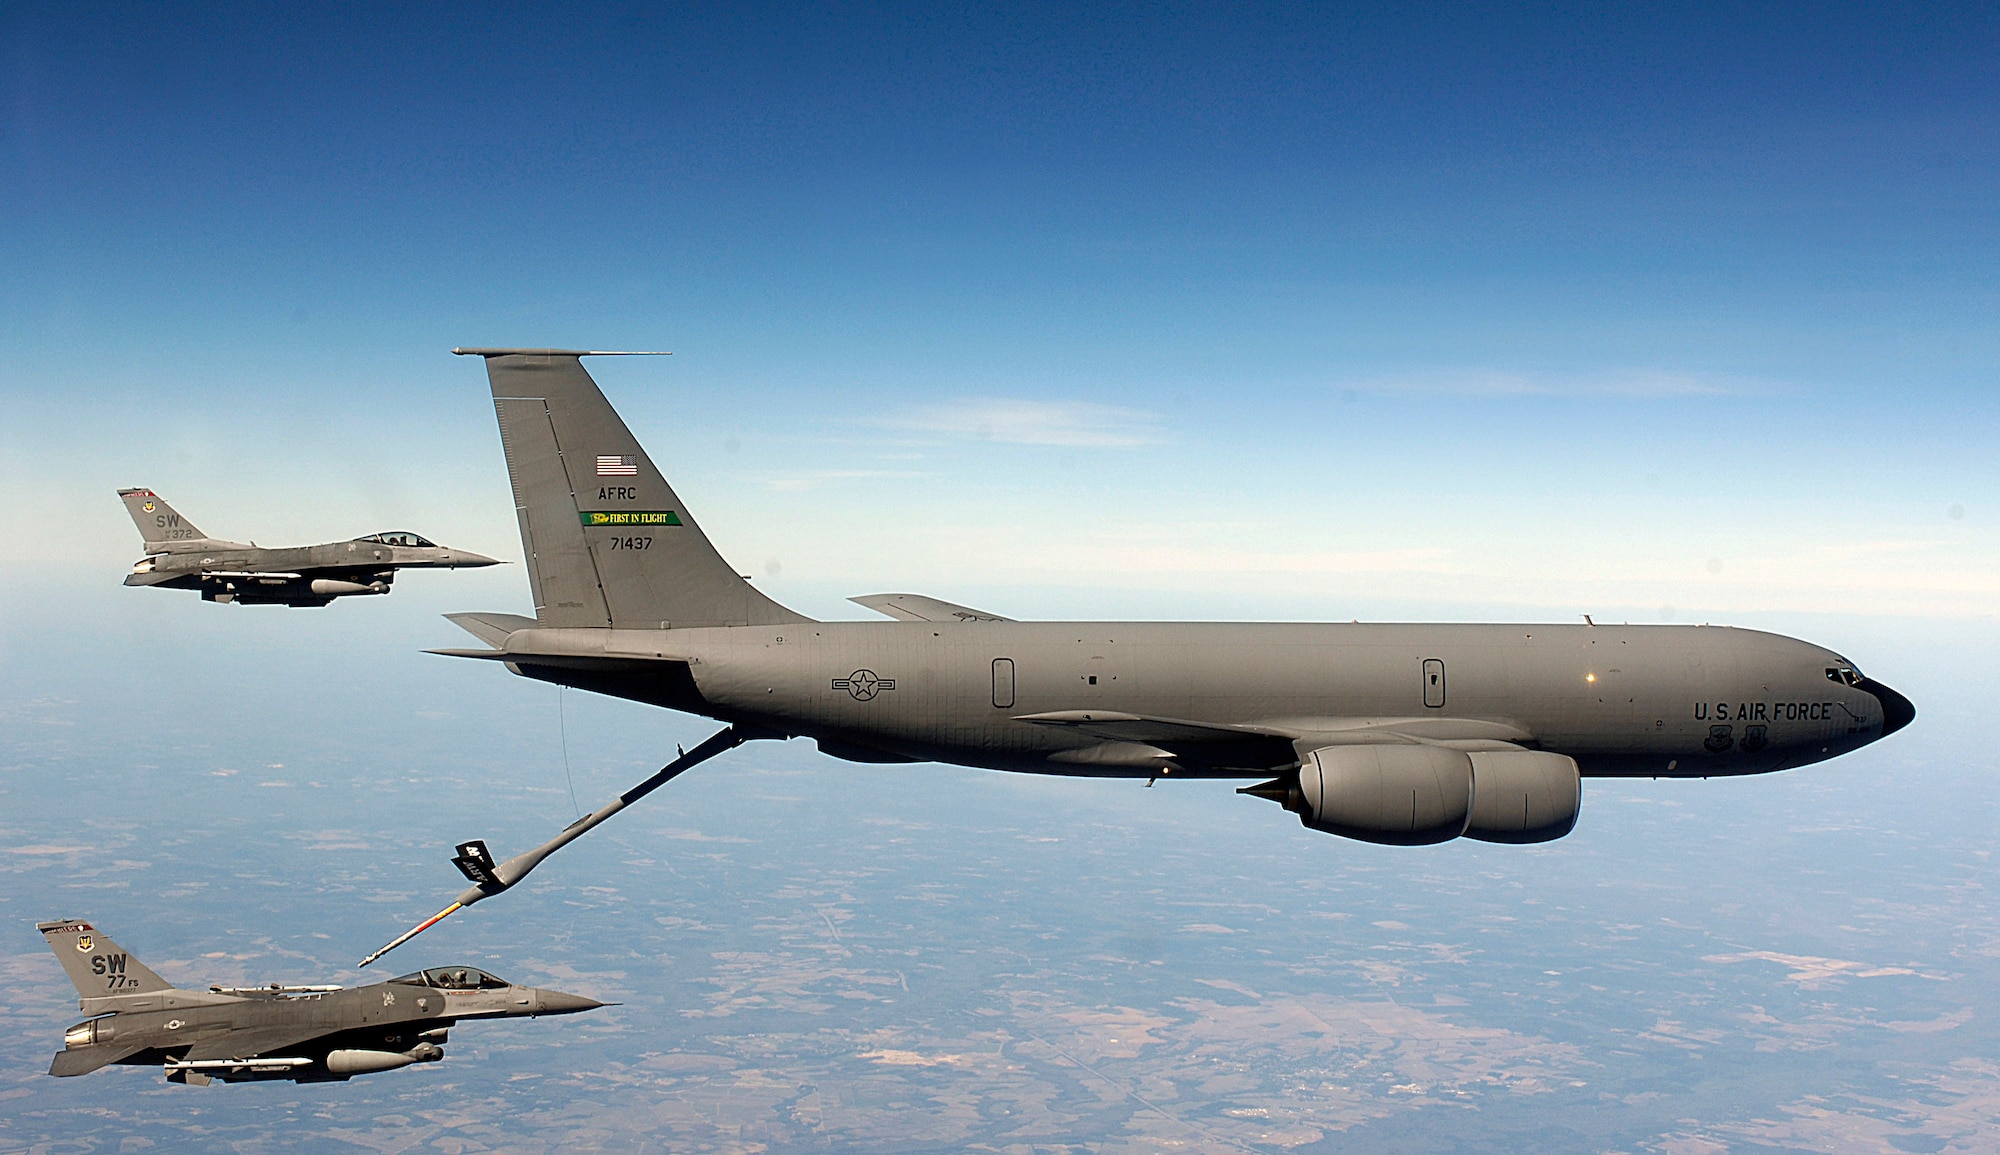 A KC-135 Stratotanker refuels an F-16 Fighting Falcon in this stock photo. The same types of aircraft were used April 6 to trail a stolen Cessna that crossed into the U.S. from Canada and landed in Missouri after a seven-hour ordeal. The KC-135 that supported the F-16s operated under command and control of the 618th Tanker Airlift Control Center, Air Mobility Command's hub for worldwide airlift, air refueling and aeromedical evacuation operations. (U.S. Air Force photo/Staff Sgt. Suzanne Day)